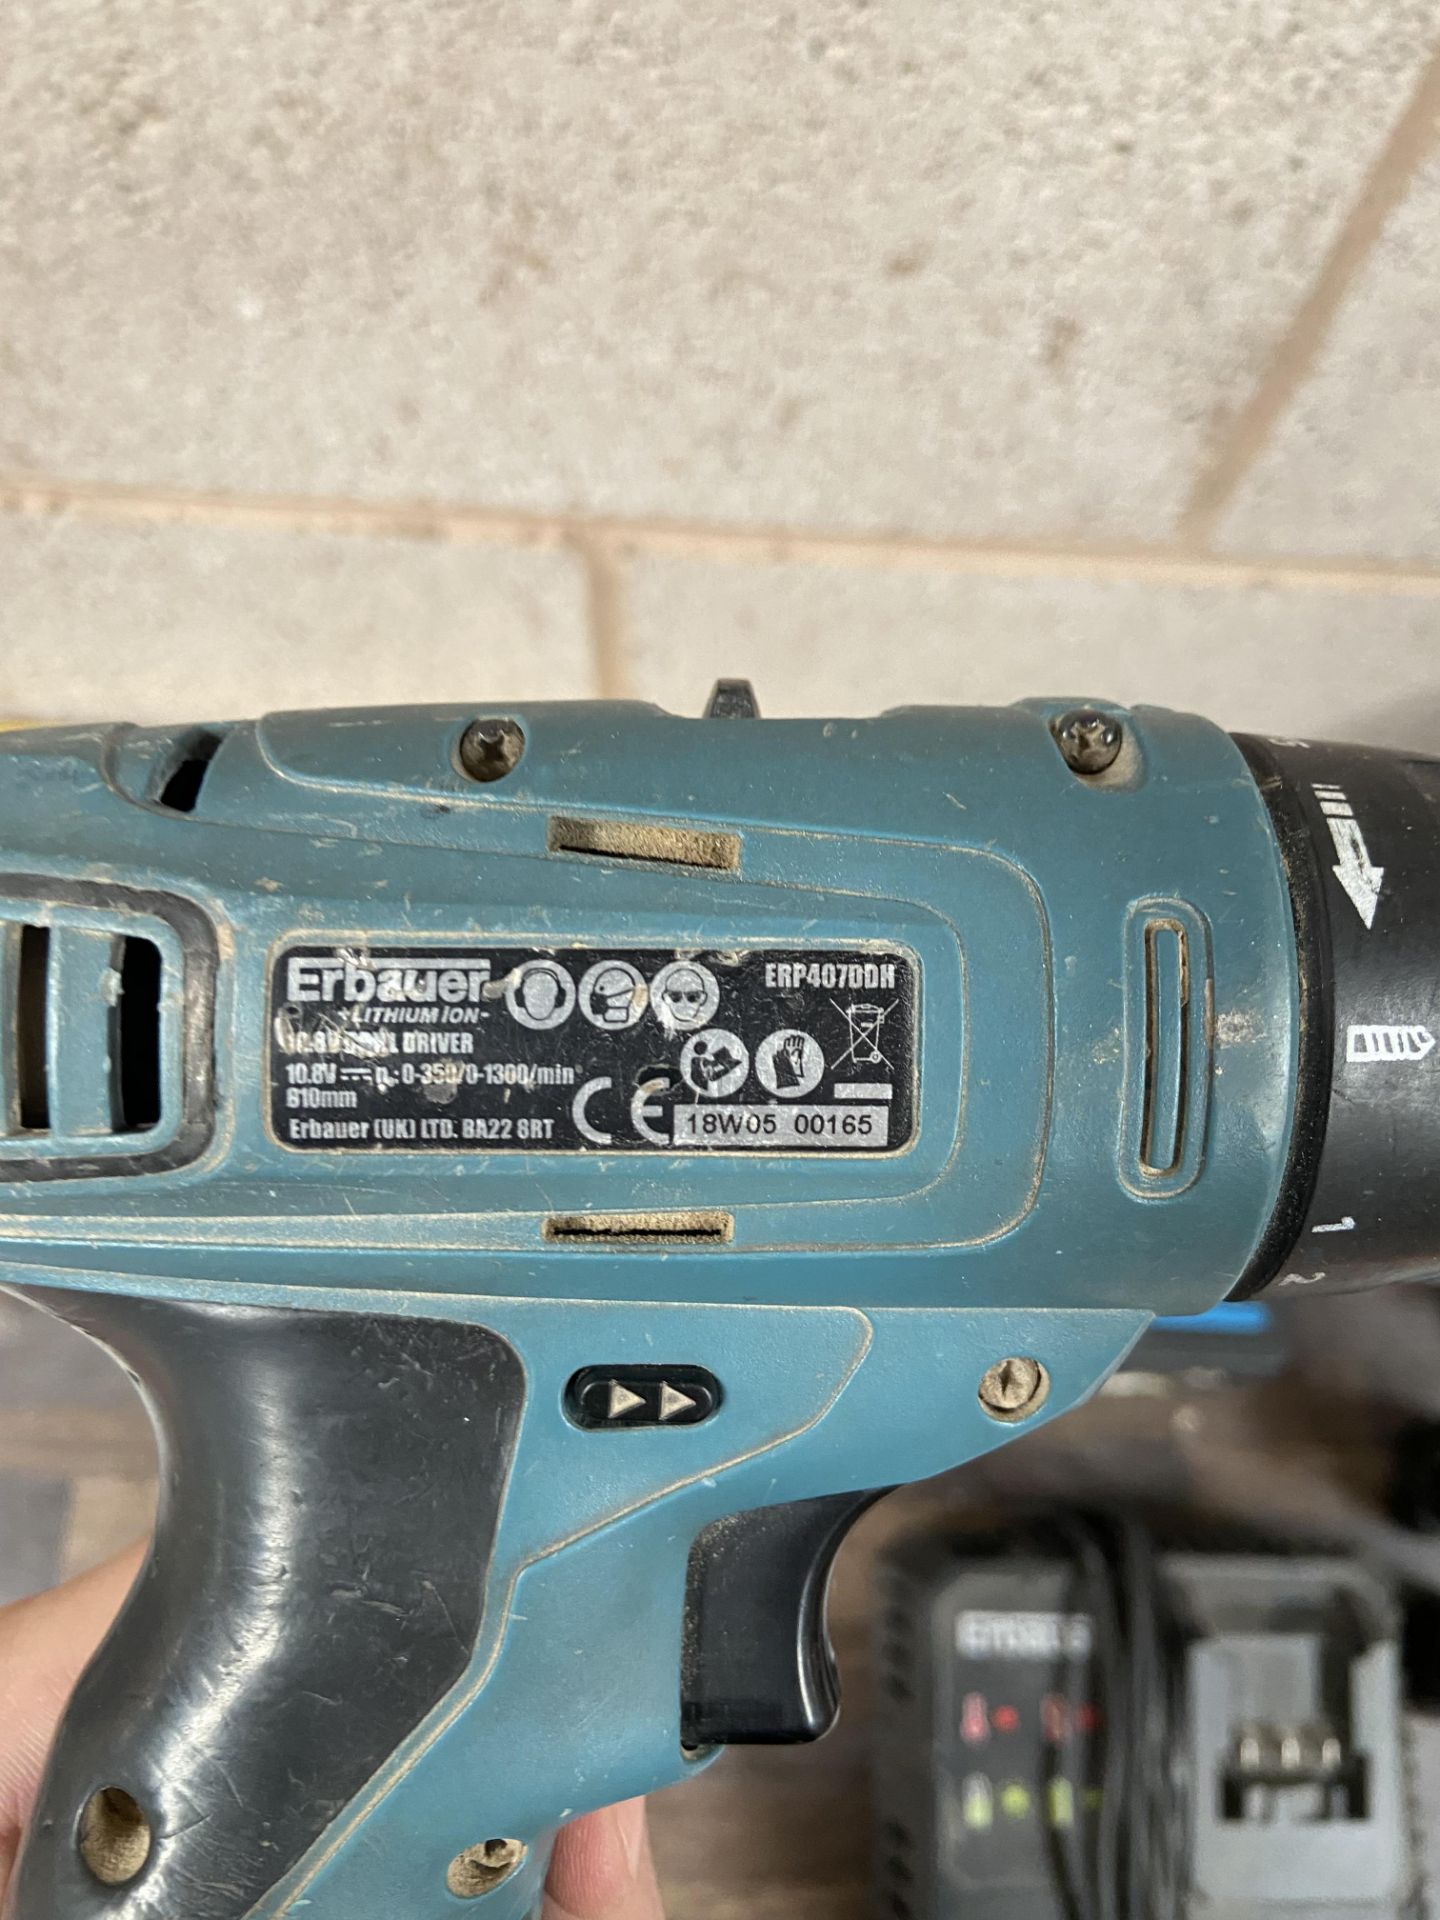 4 x Erbauer power tools, Erbauer drill driver, Erbauer EDD18-Li-2 Drill &2 x Erbauer Impact driver - Image 2 of 5